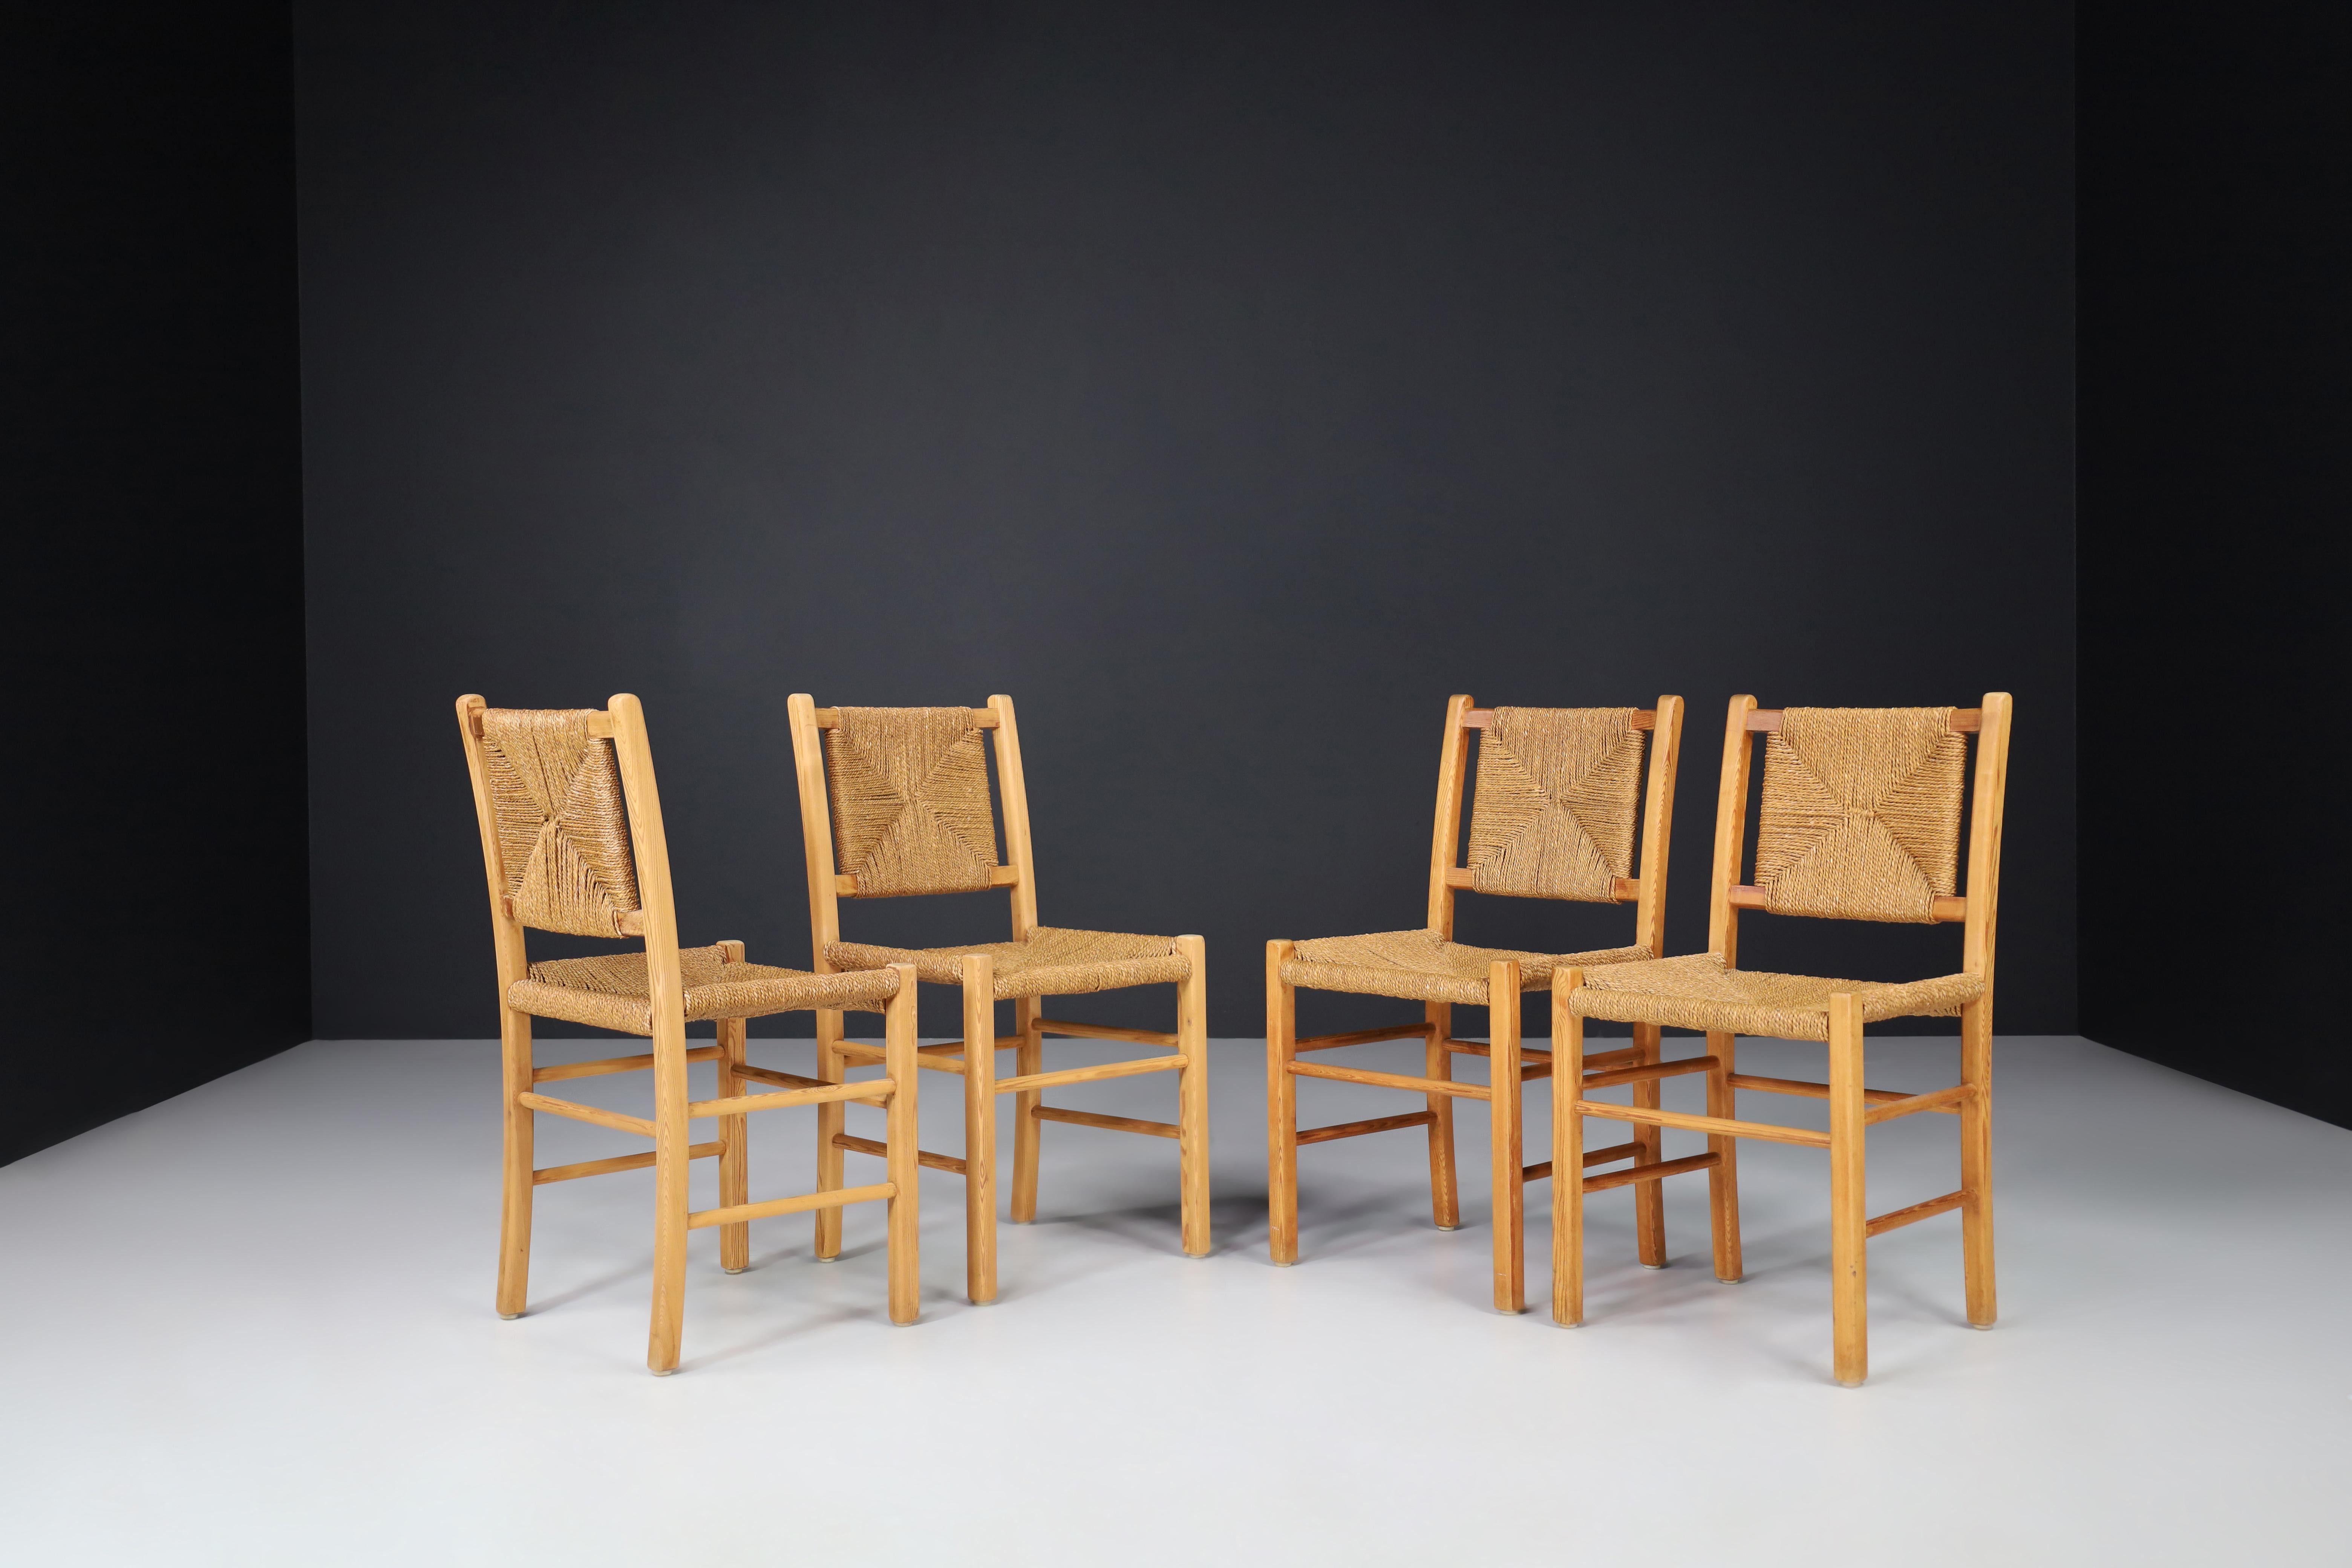 Pine and rope dining chairs, France 1960s. 

These chairs are made of solid pine and handwoven cord seats and backseats. The chairs are in good vintage condition and can be used as dining or side chairs. These chairs would be an eye-catching